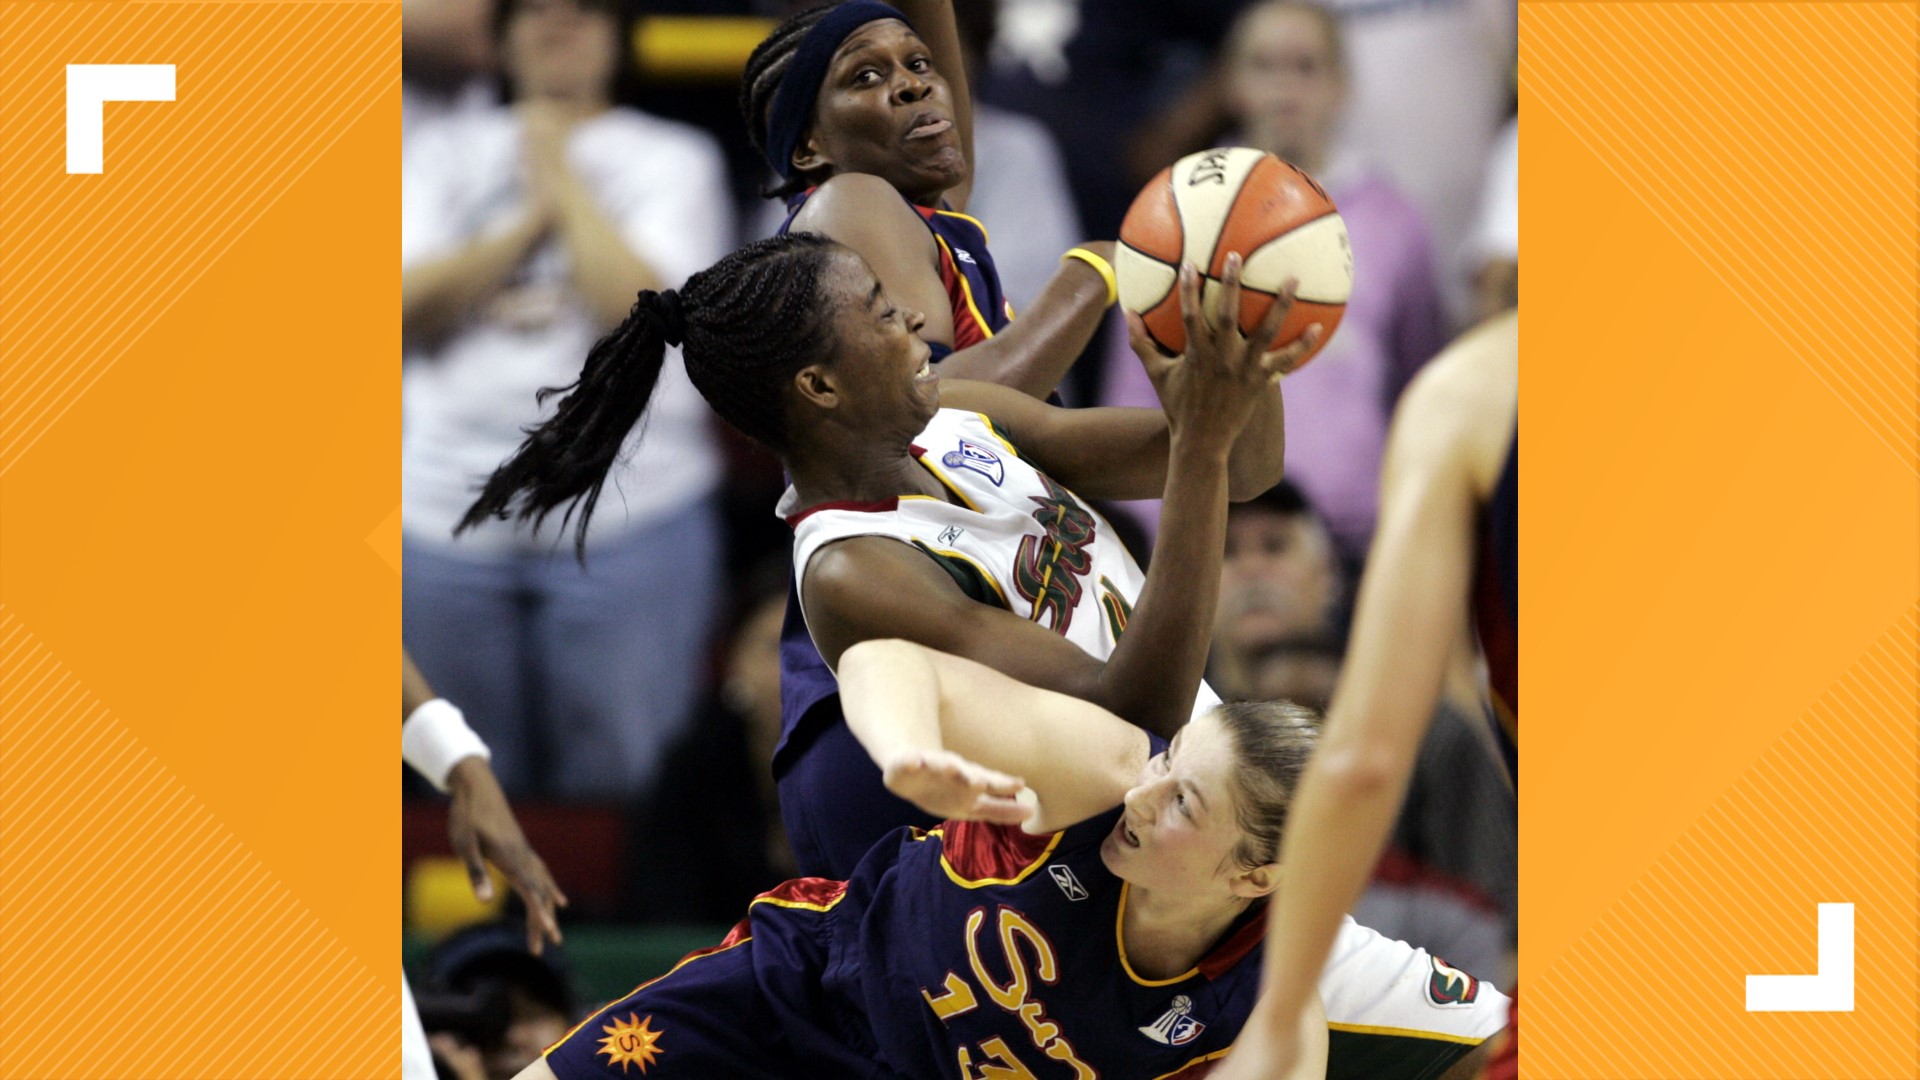 Simone Edwards, a native of Jamaica, was a four-time letterwinner with the Hawkeyes. She then tried out for the New York Liberty before joining the Seattle Storm.